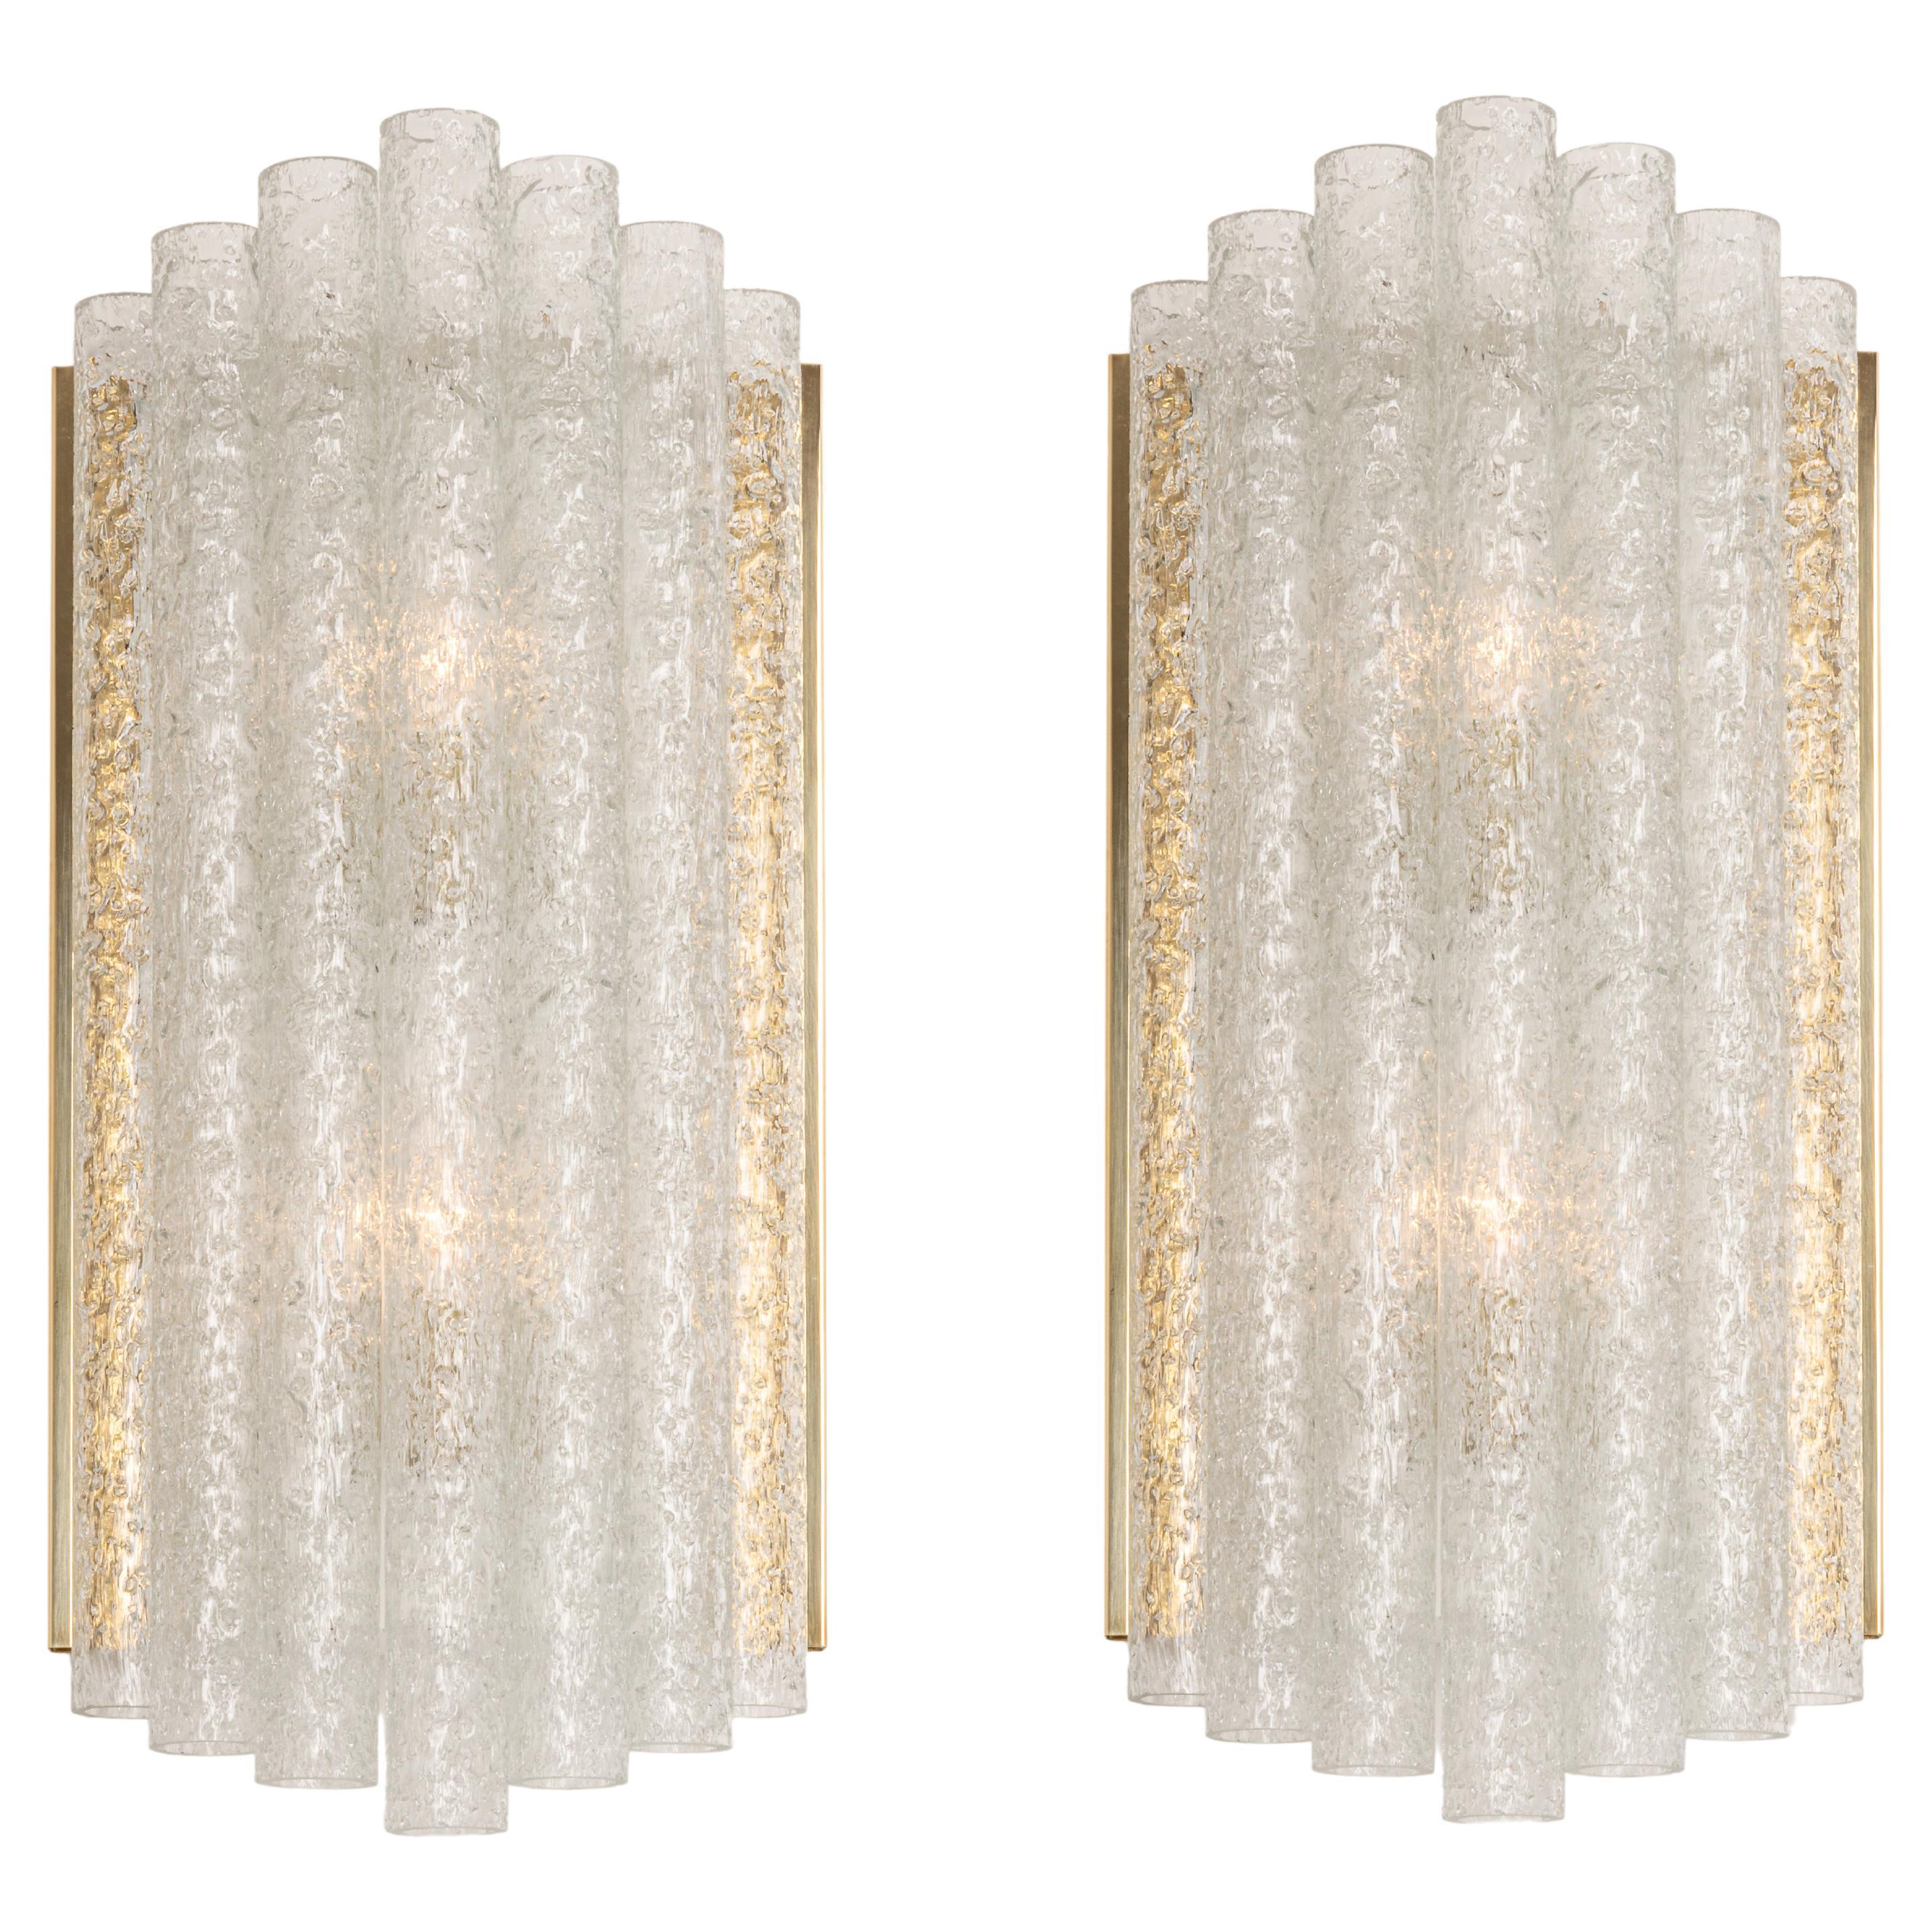 Large Pair of Brass and murano Glass Wall Sconces by Doria, Germany, 1960s